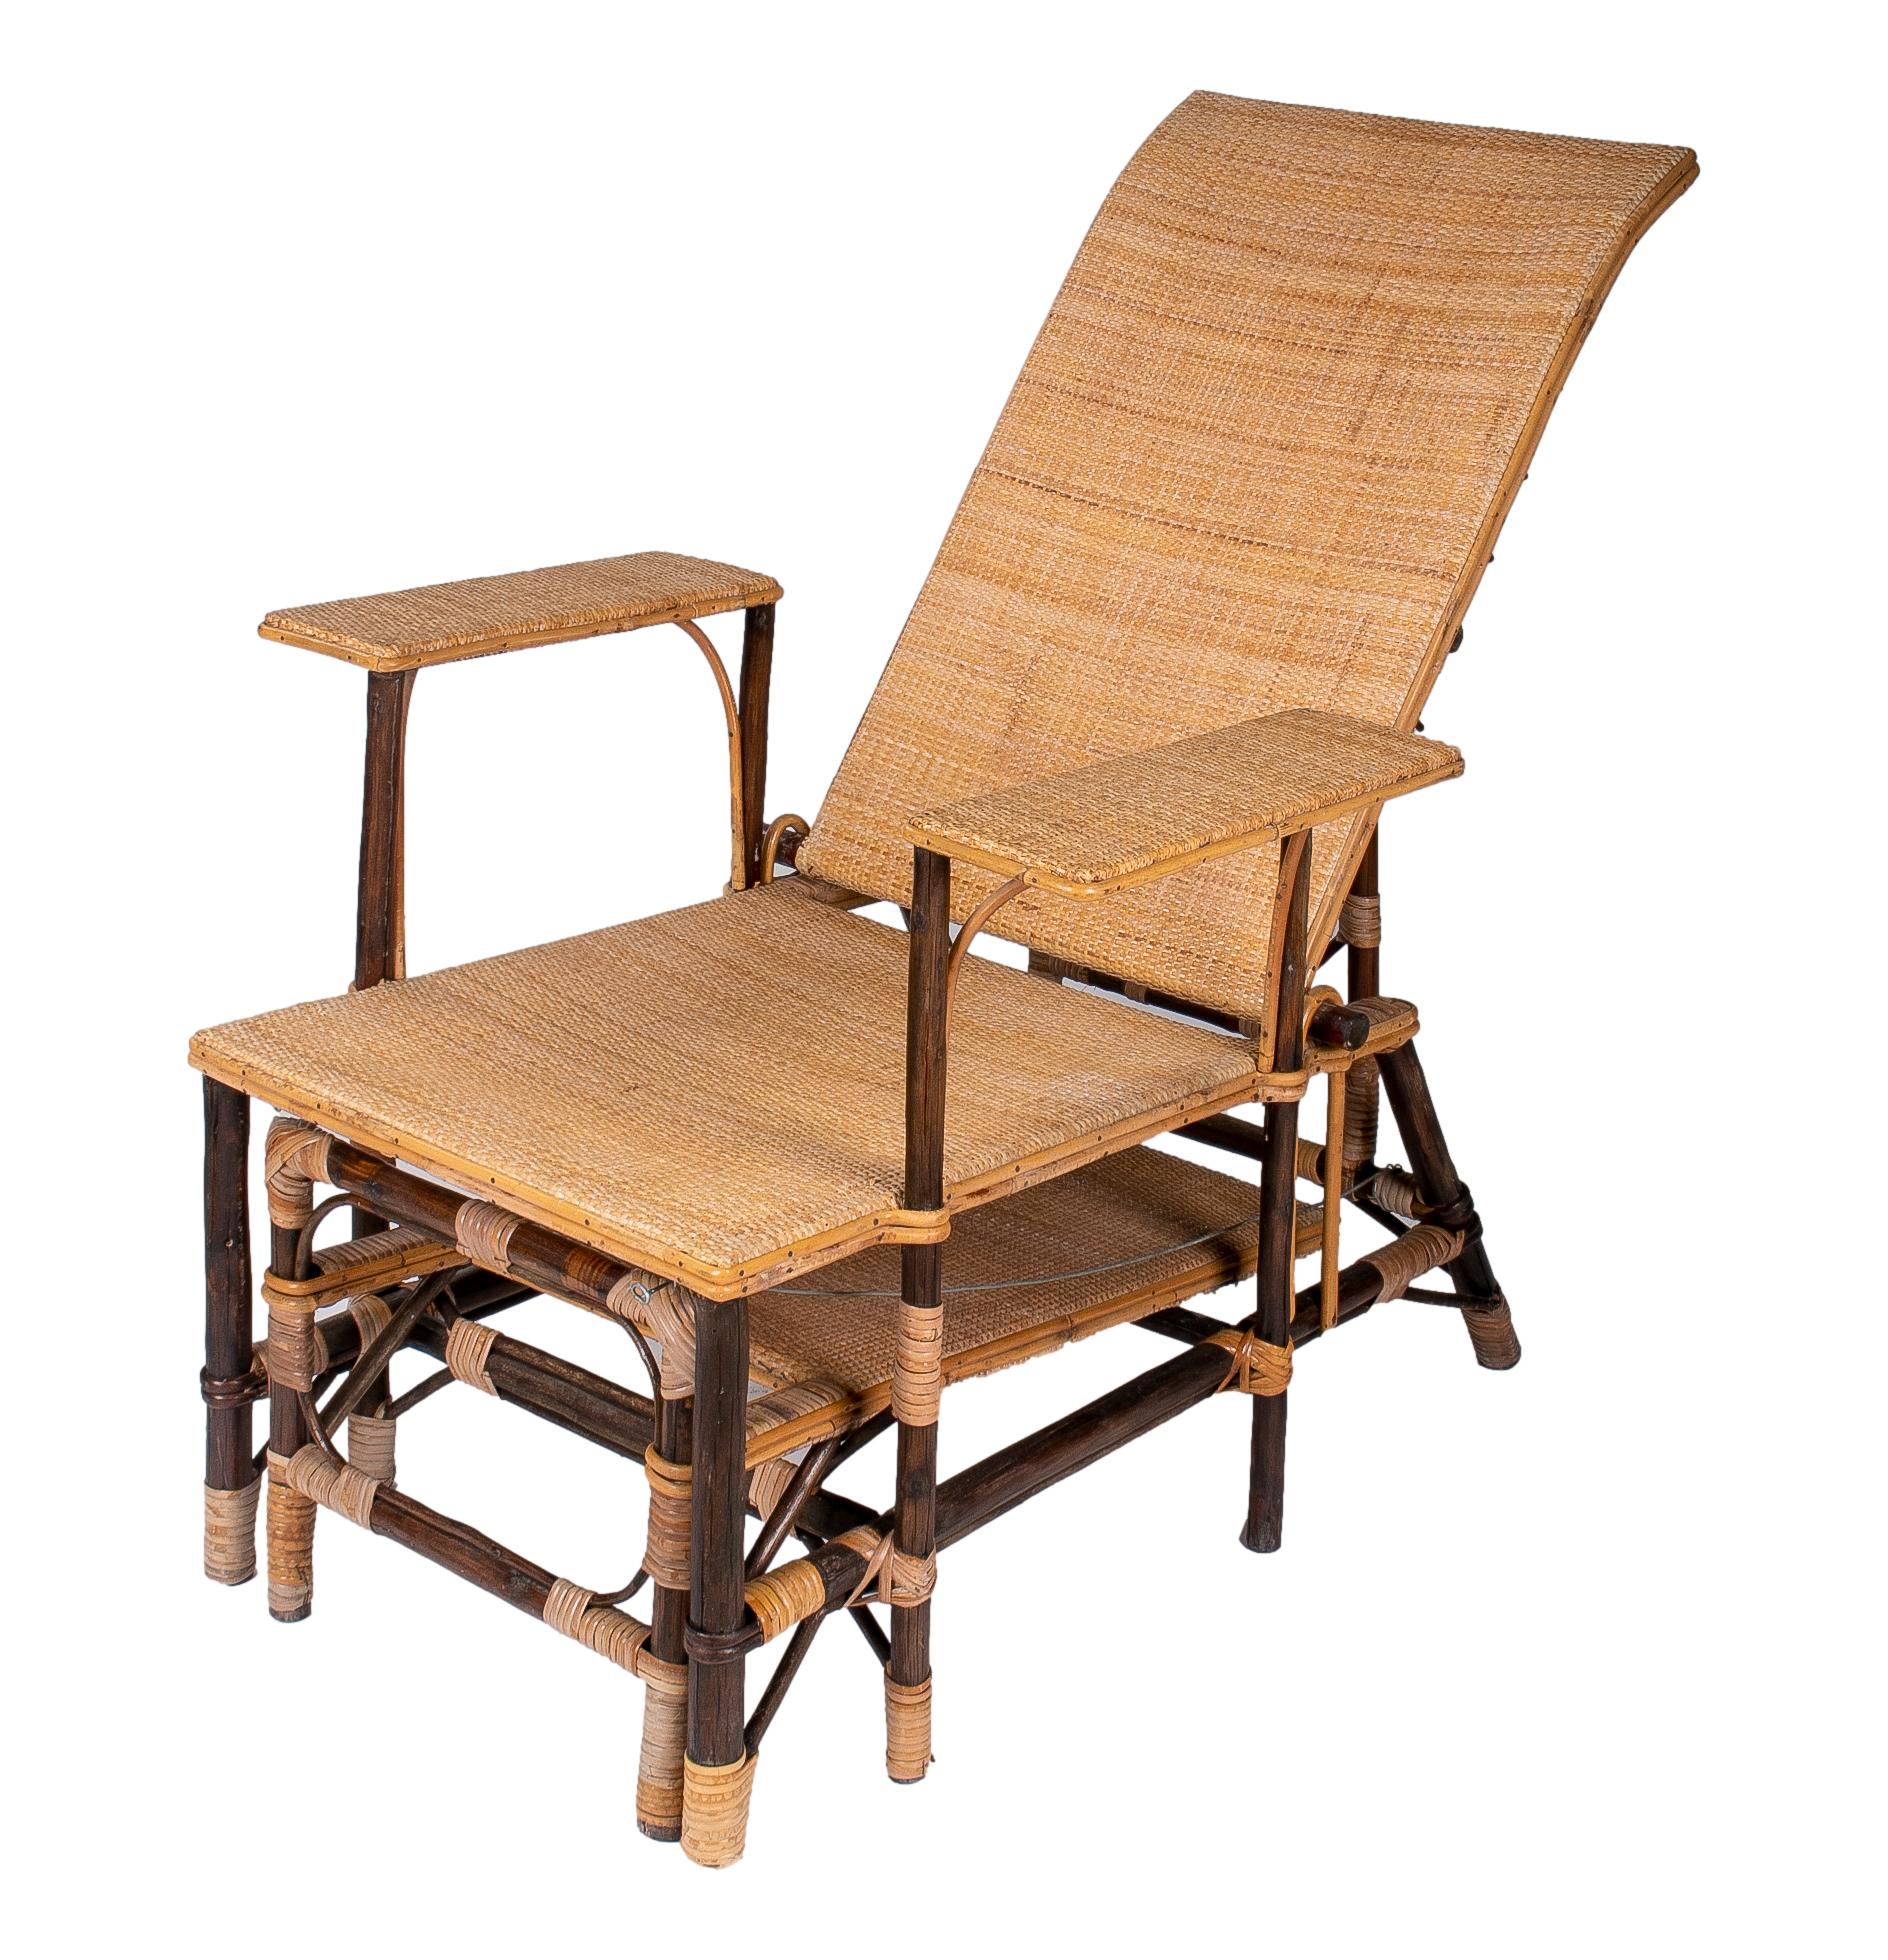 20th Century 1980s Spanish Woven Wicker & Bamboo Sunbathing Lounge Chair For Sale